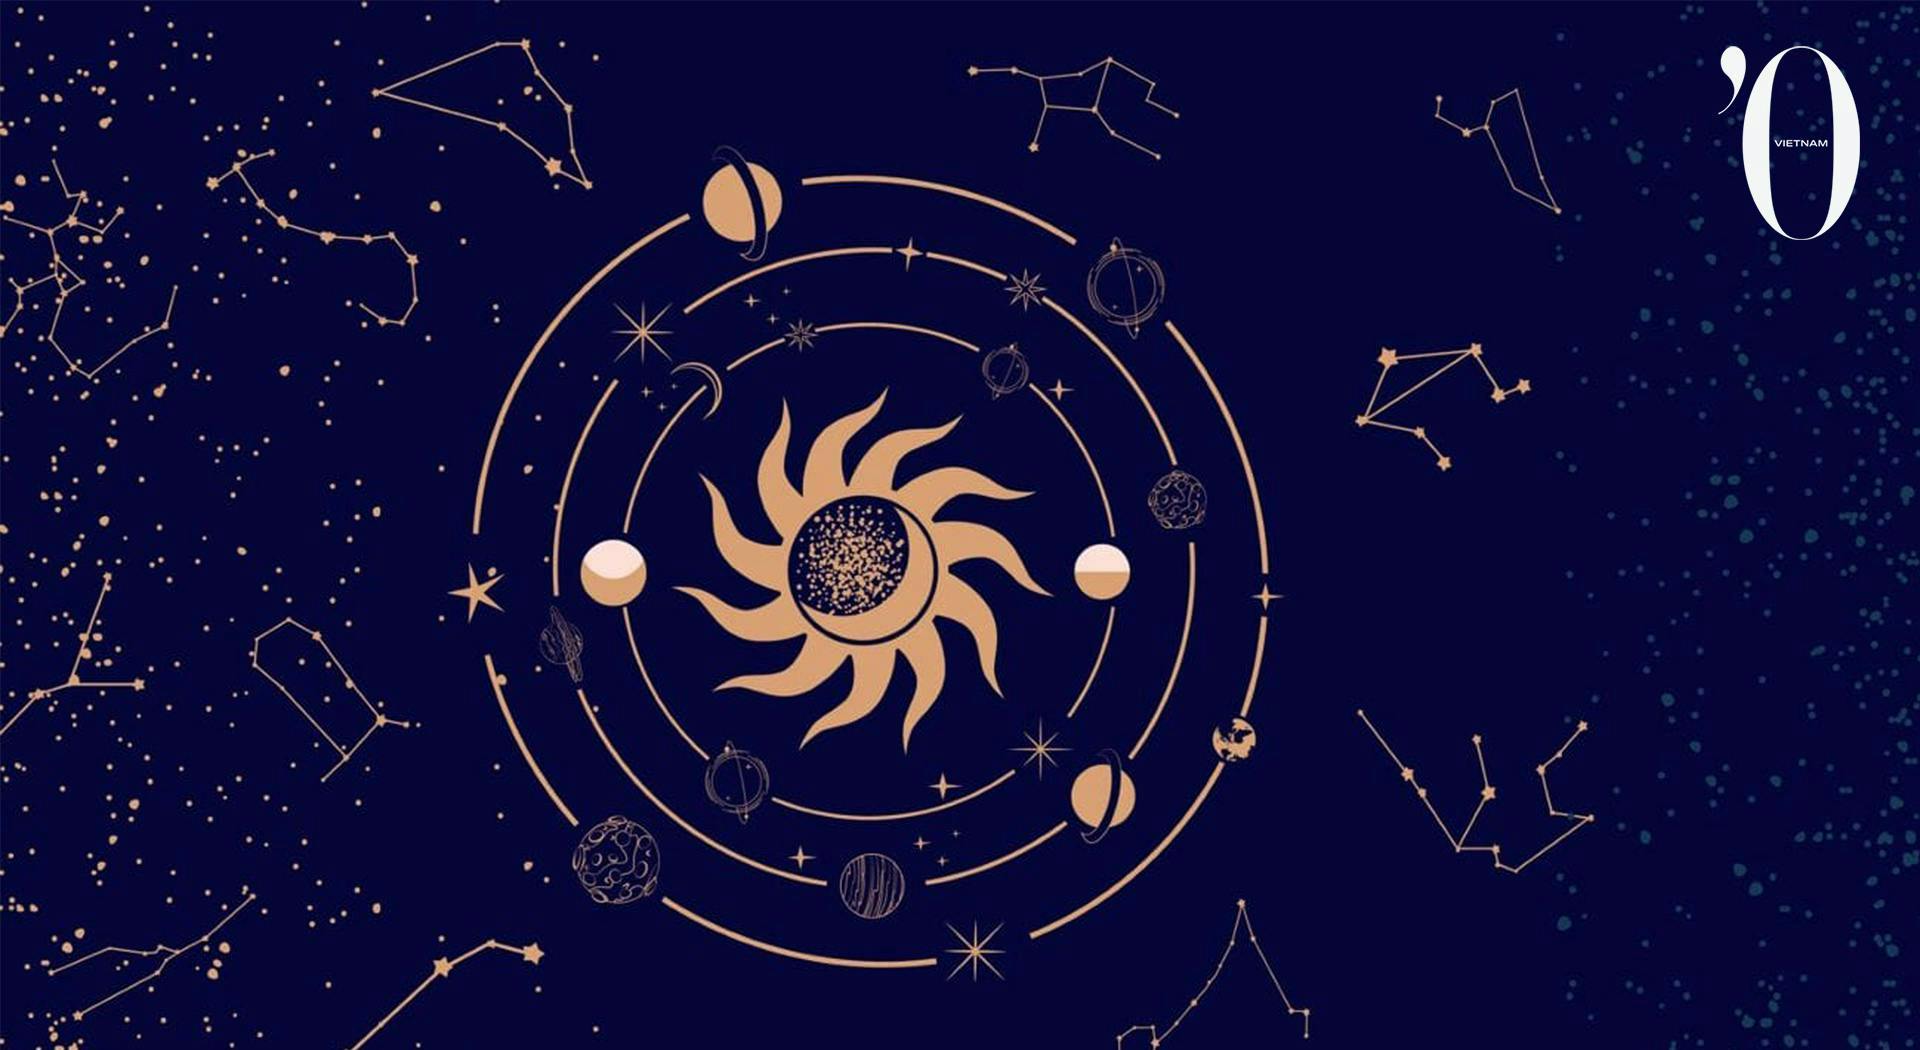 Getty Images, astrology zodiac chart on a bue background